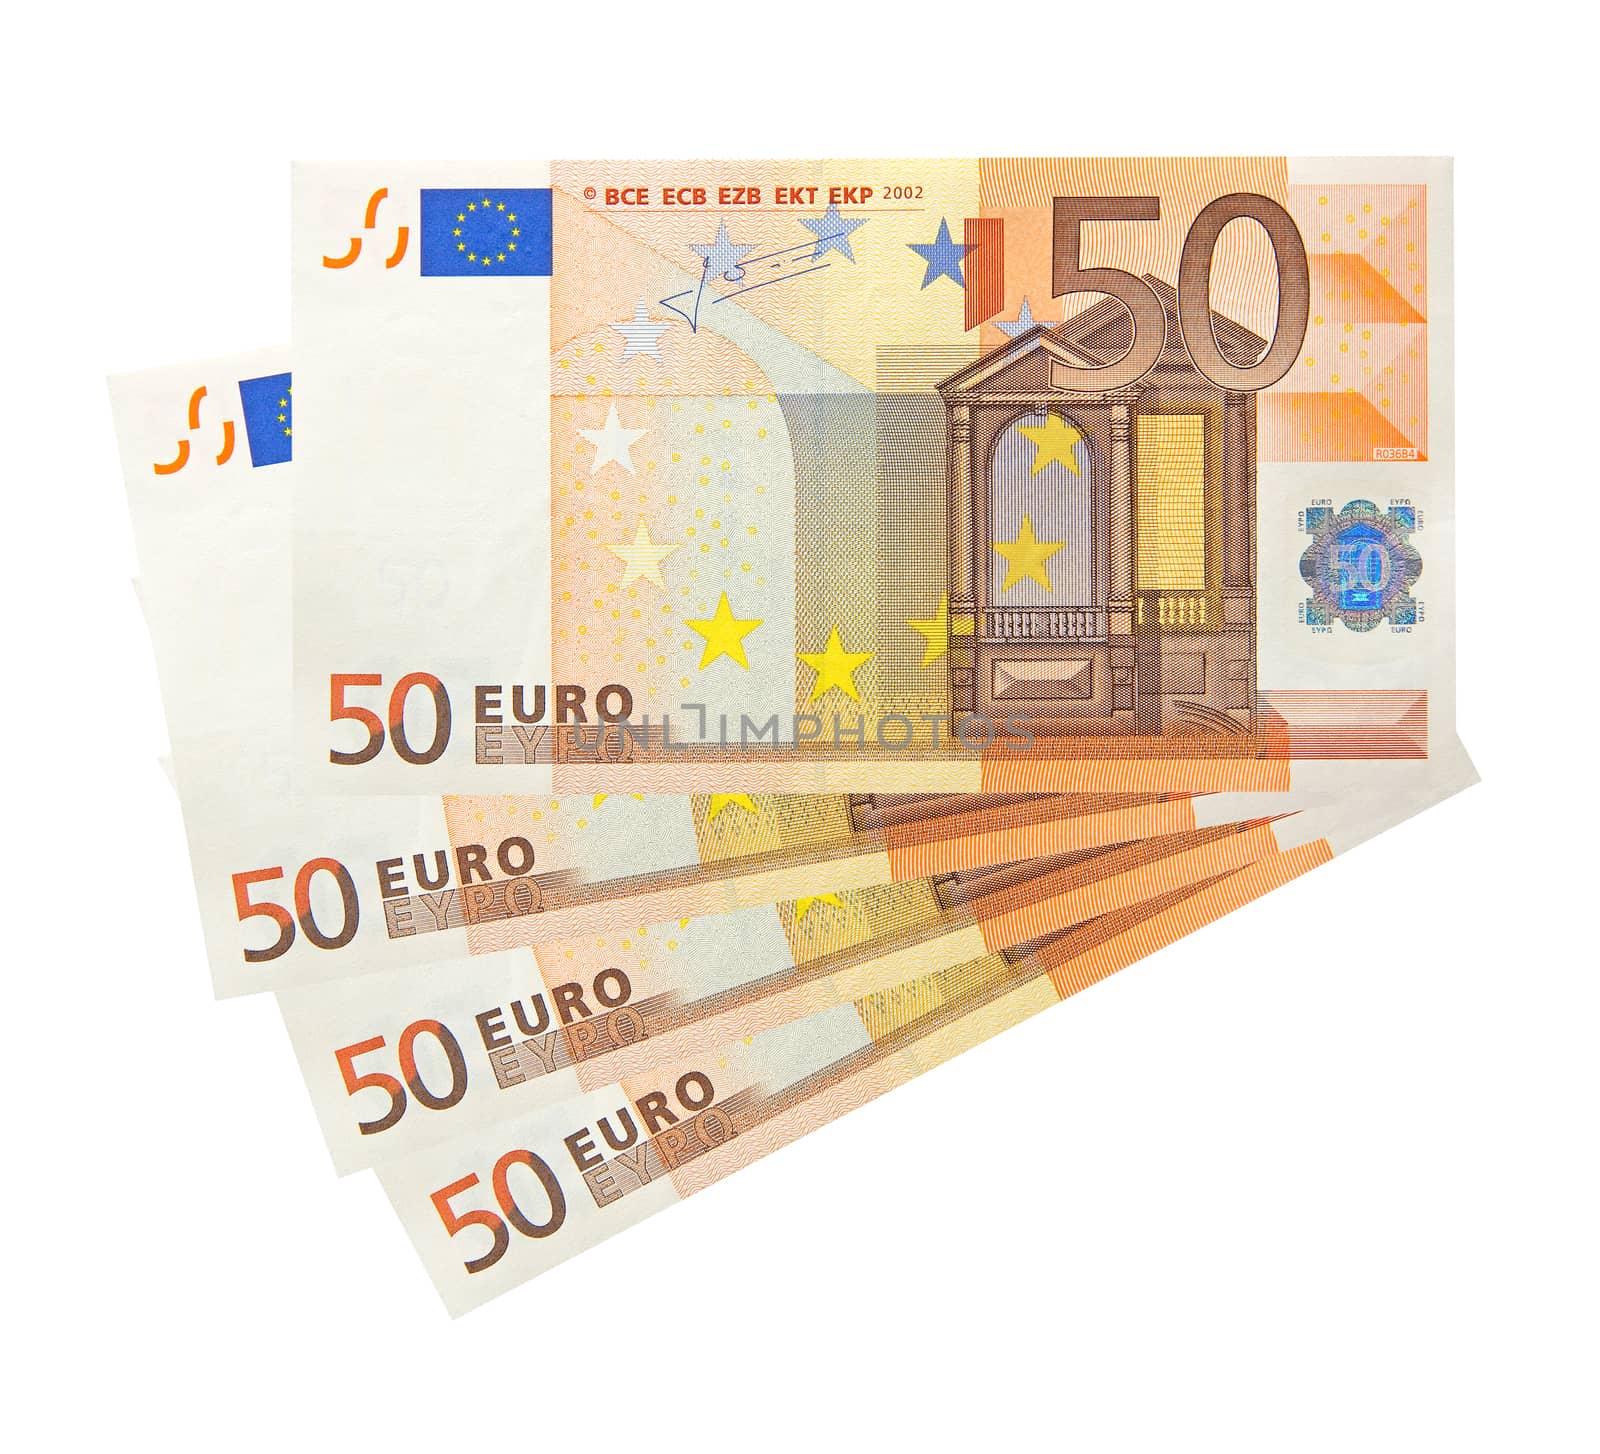 50 Euro banknote fanned out by aldorado